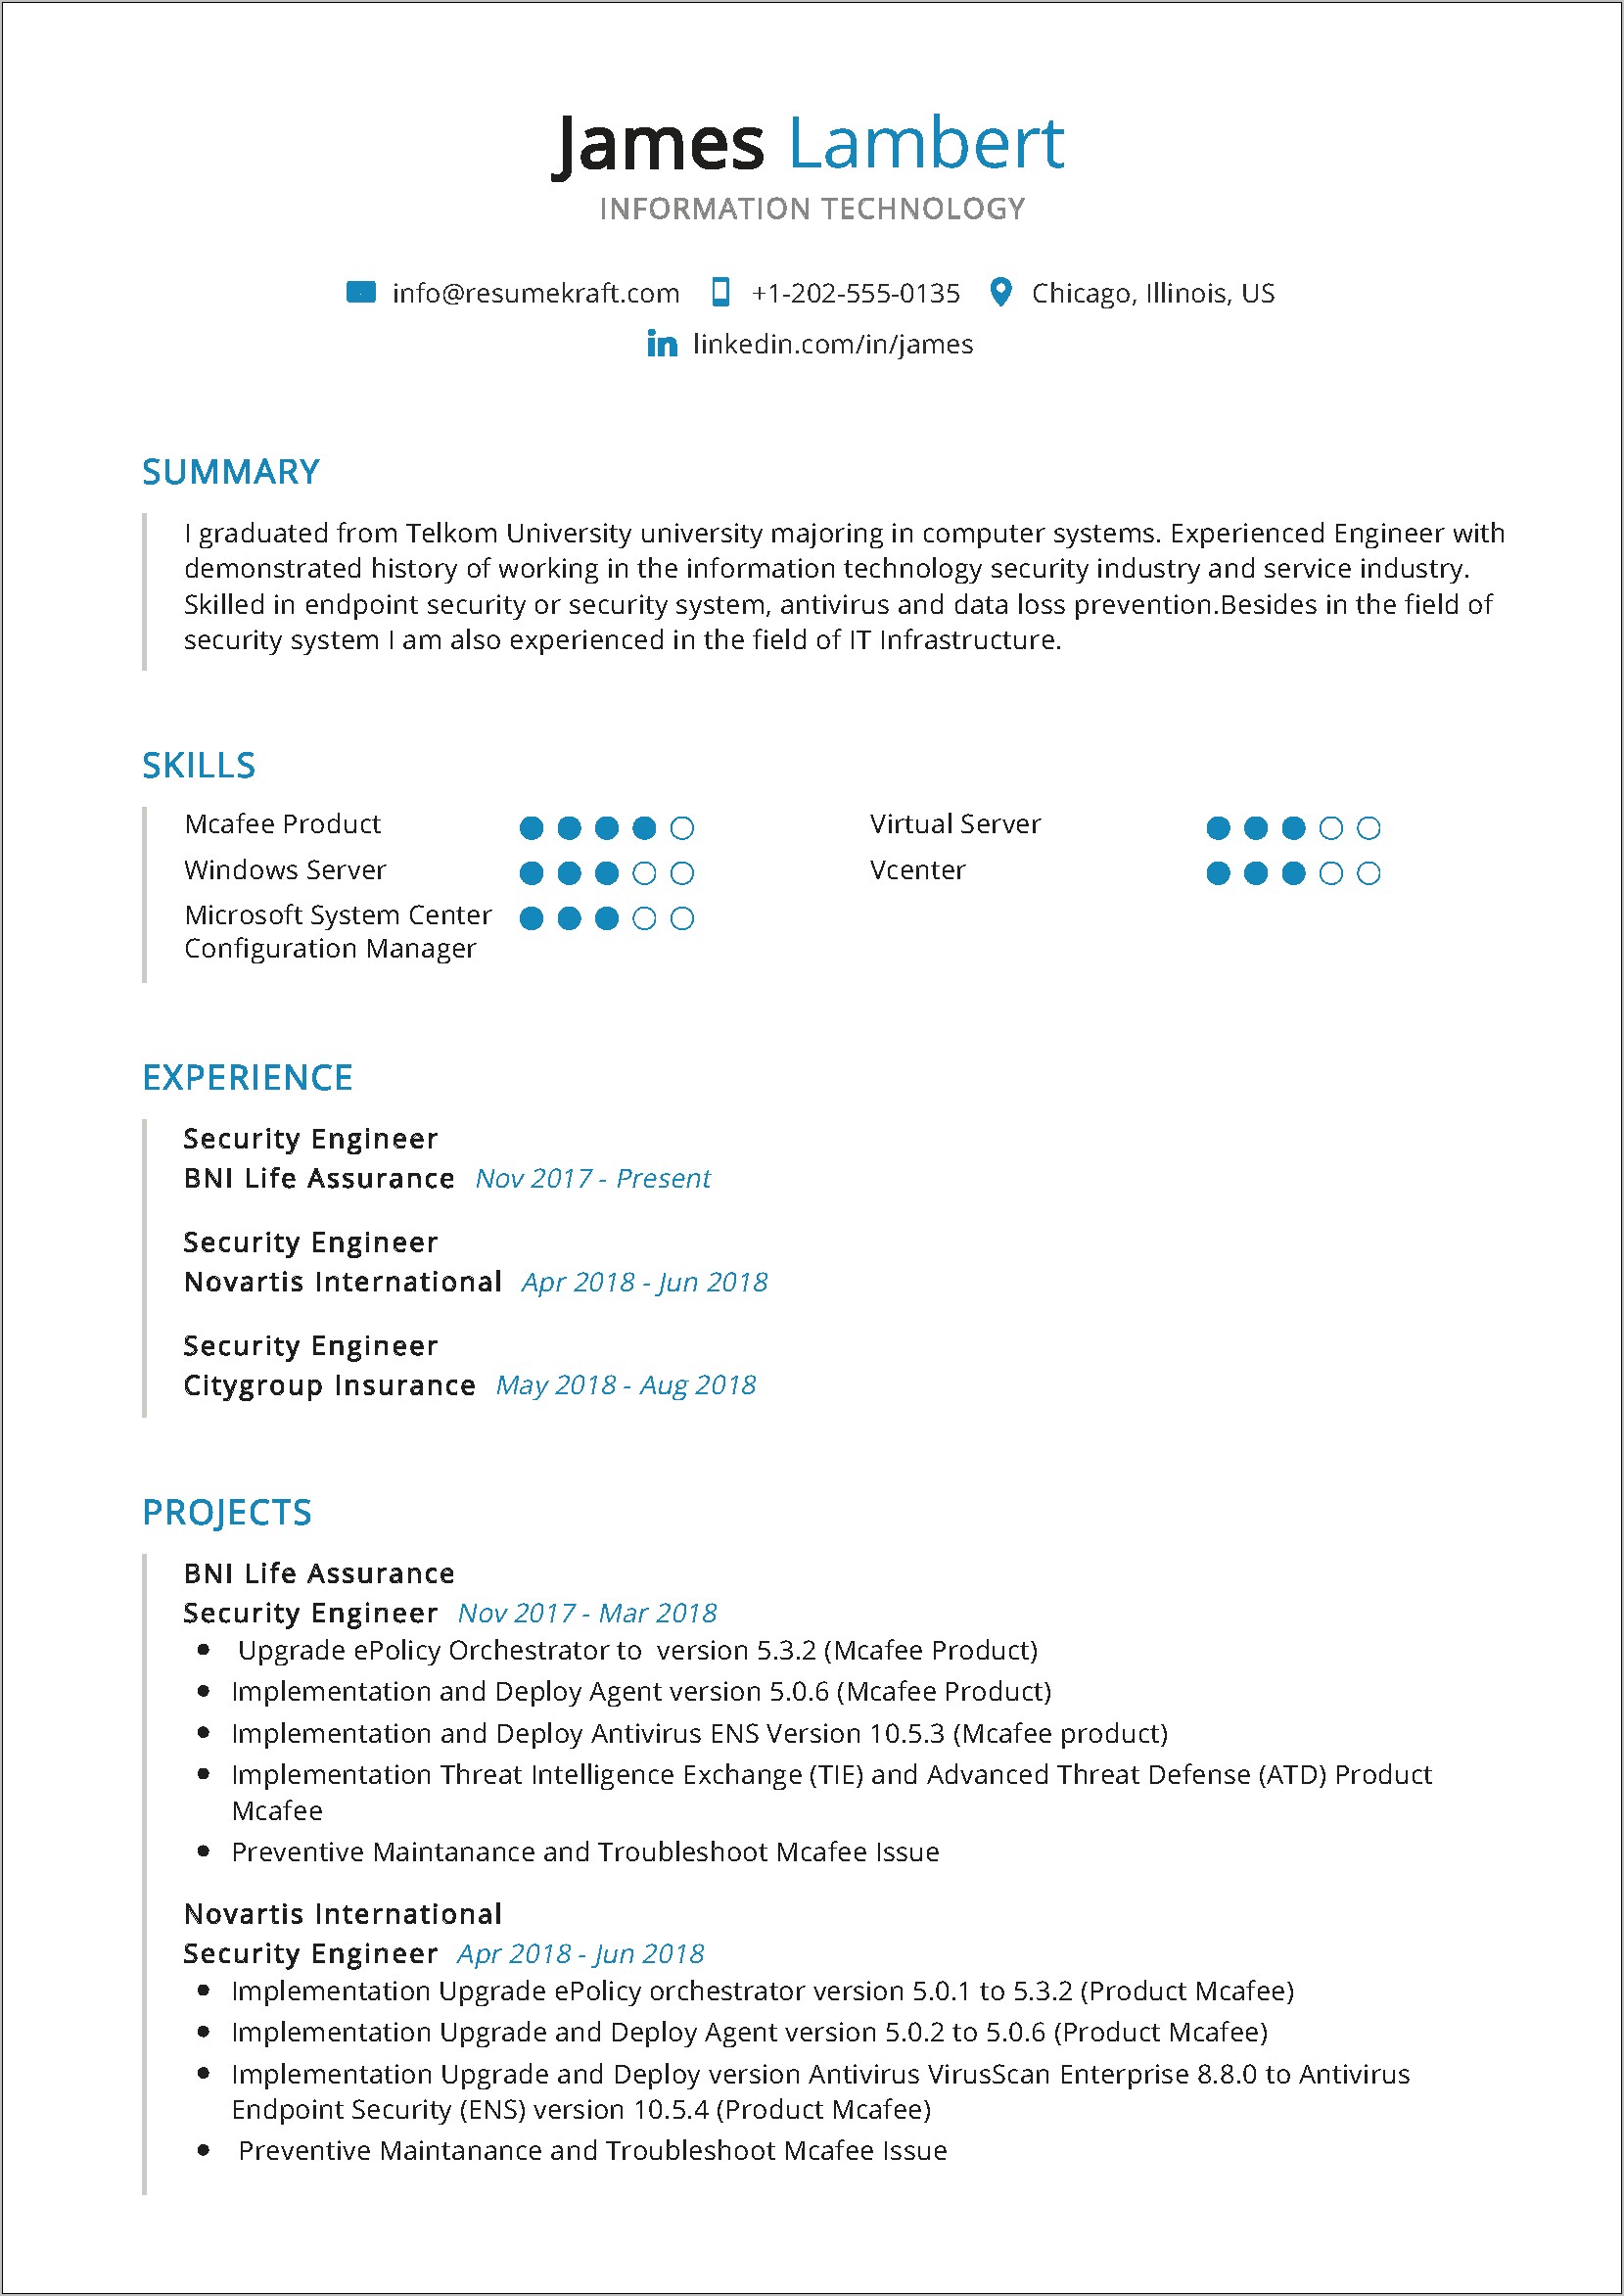 Professional Resume Templates Information Technology 2018